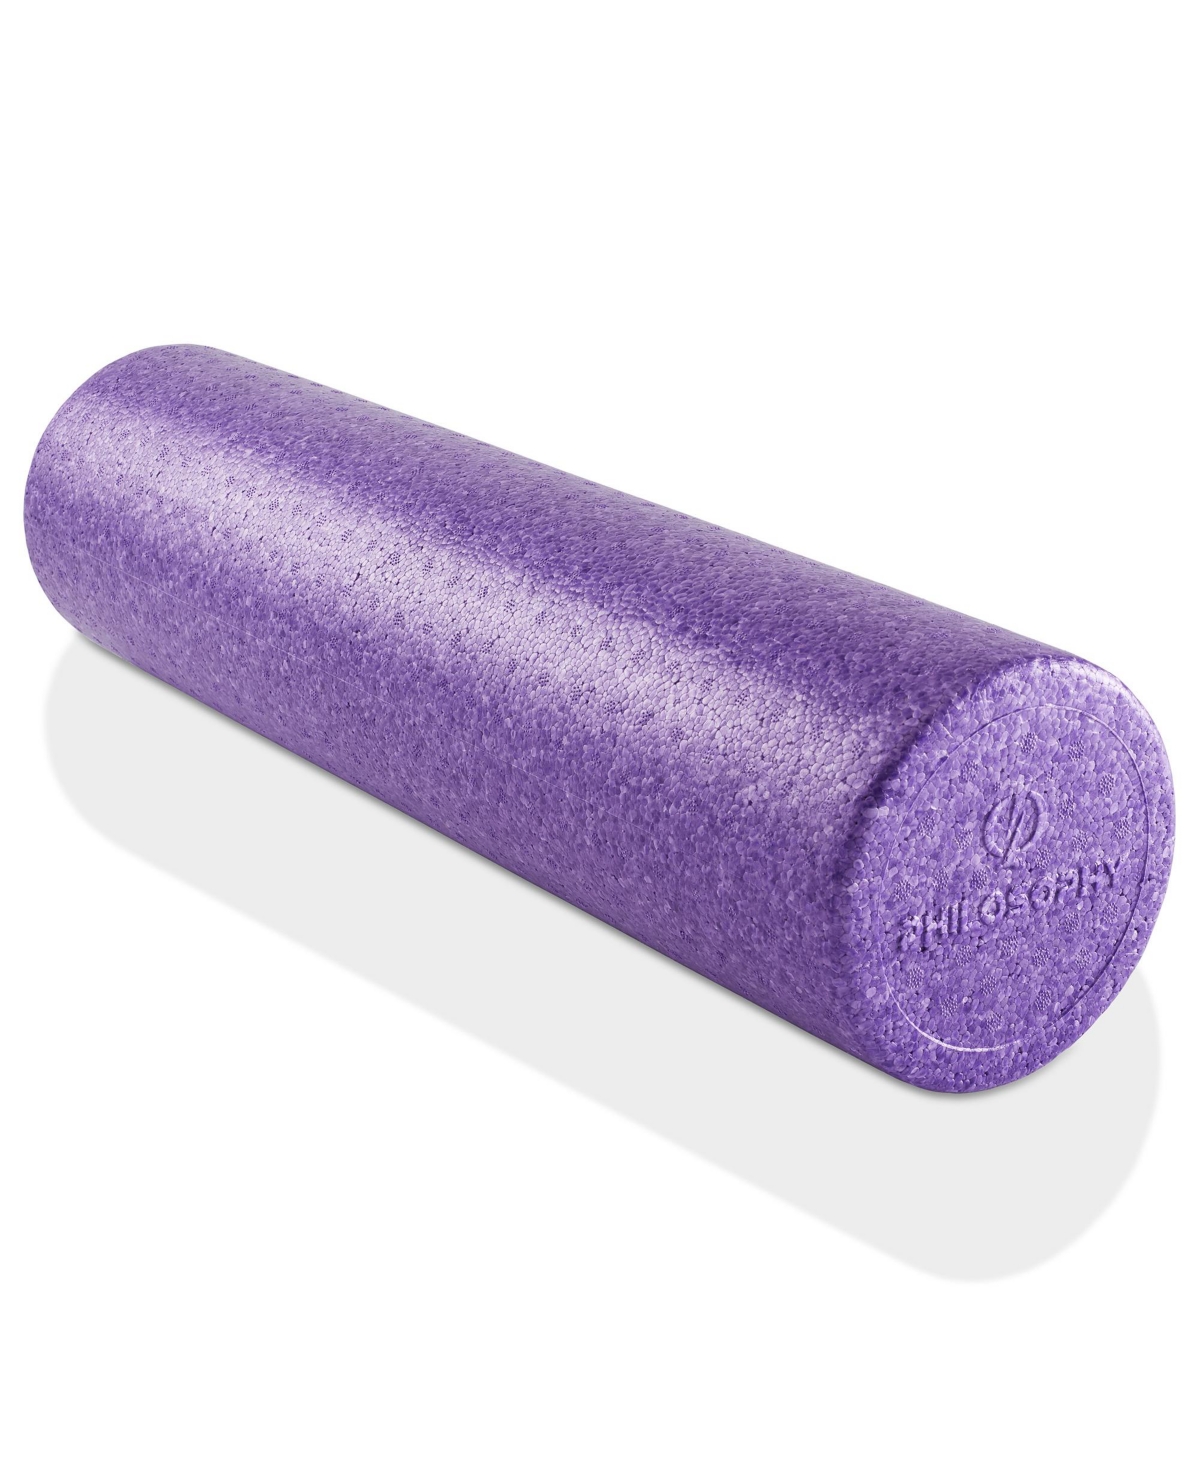 24" High-Density Foam Roller for Exercise, Massage, Muscle Recovery - Round Purple - Purple